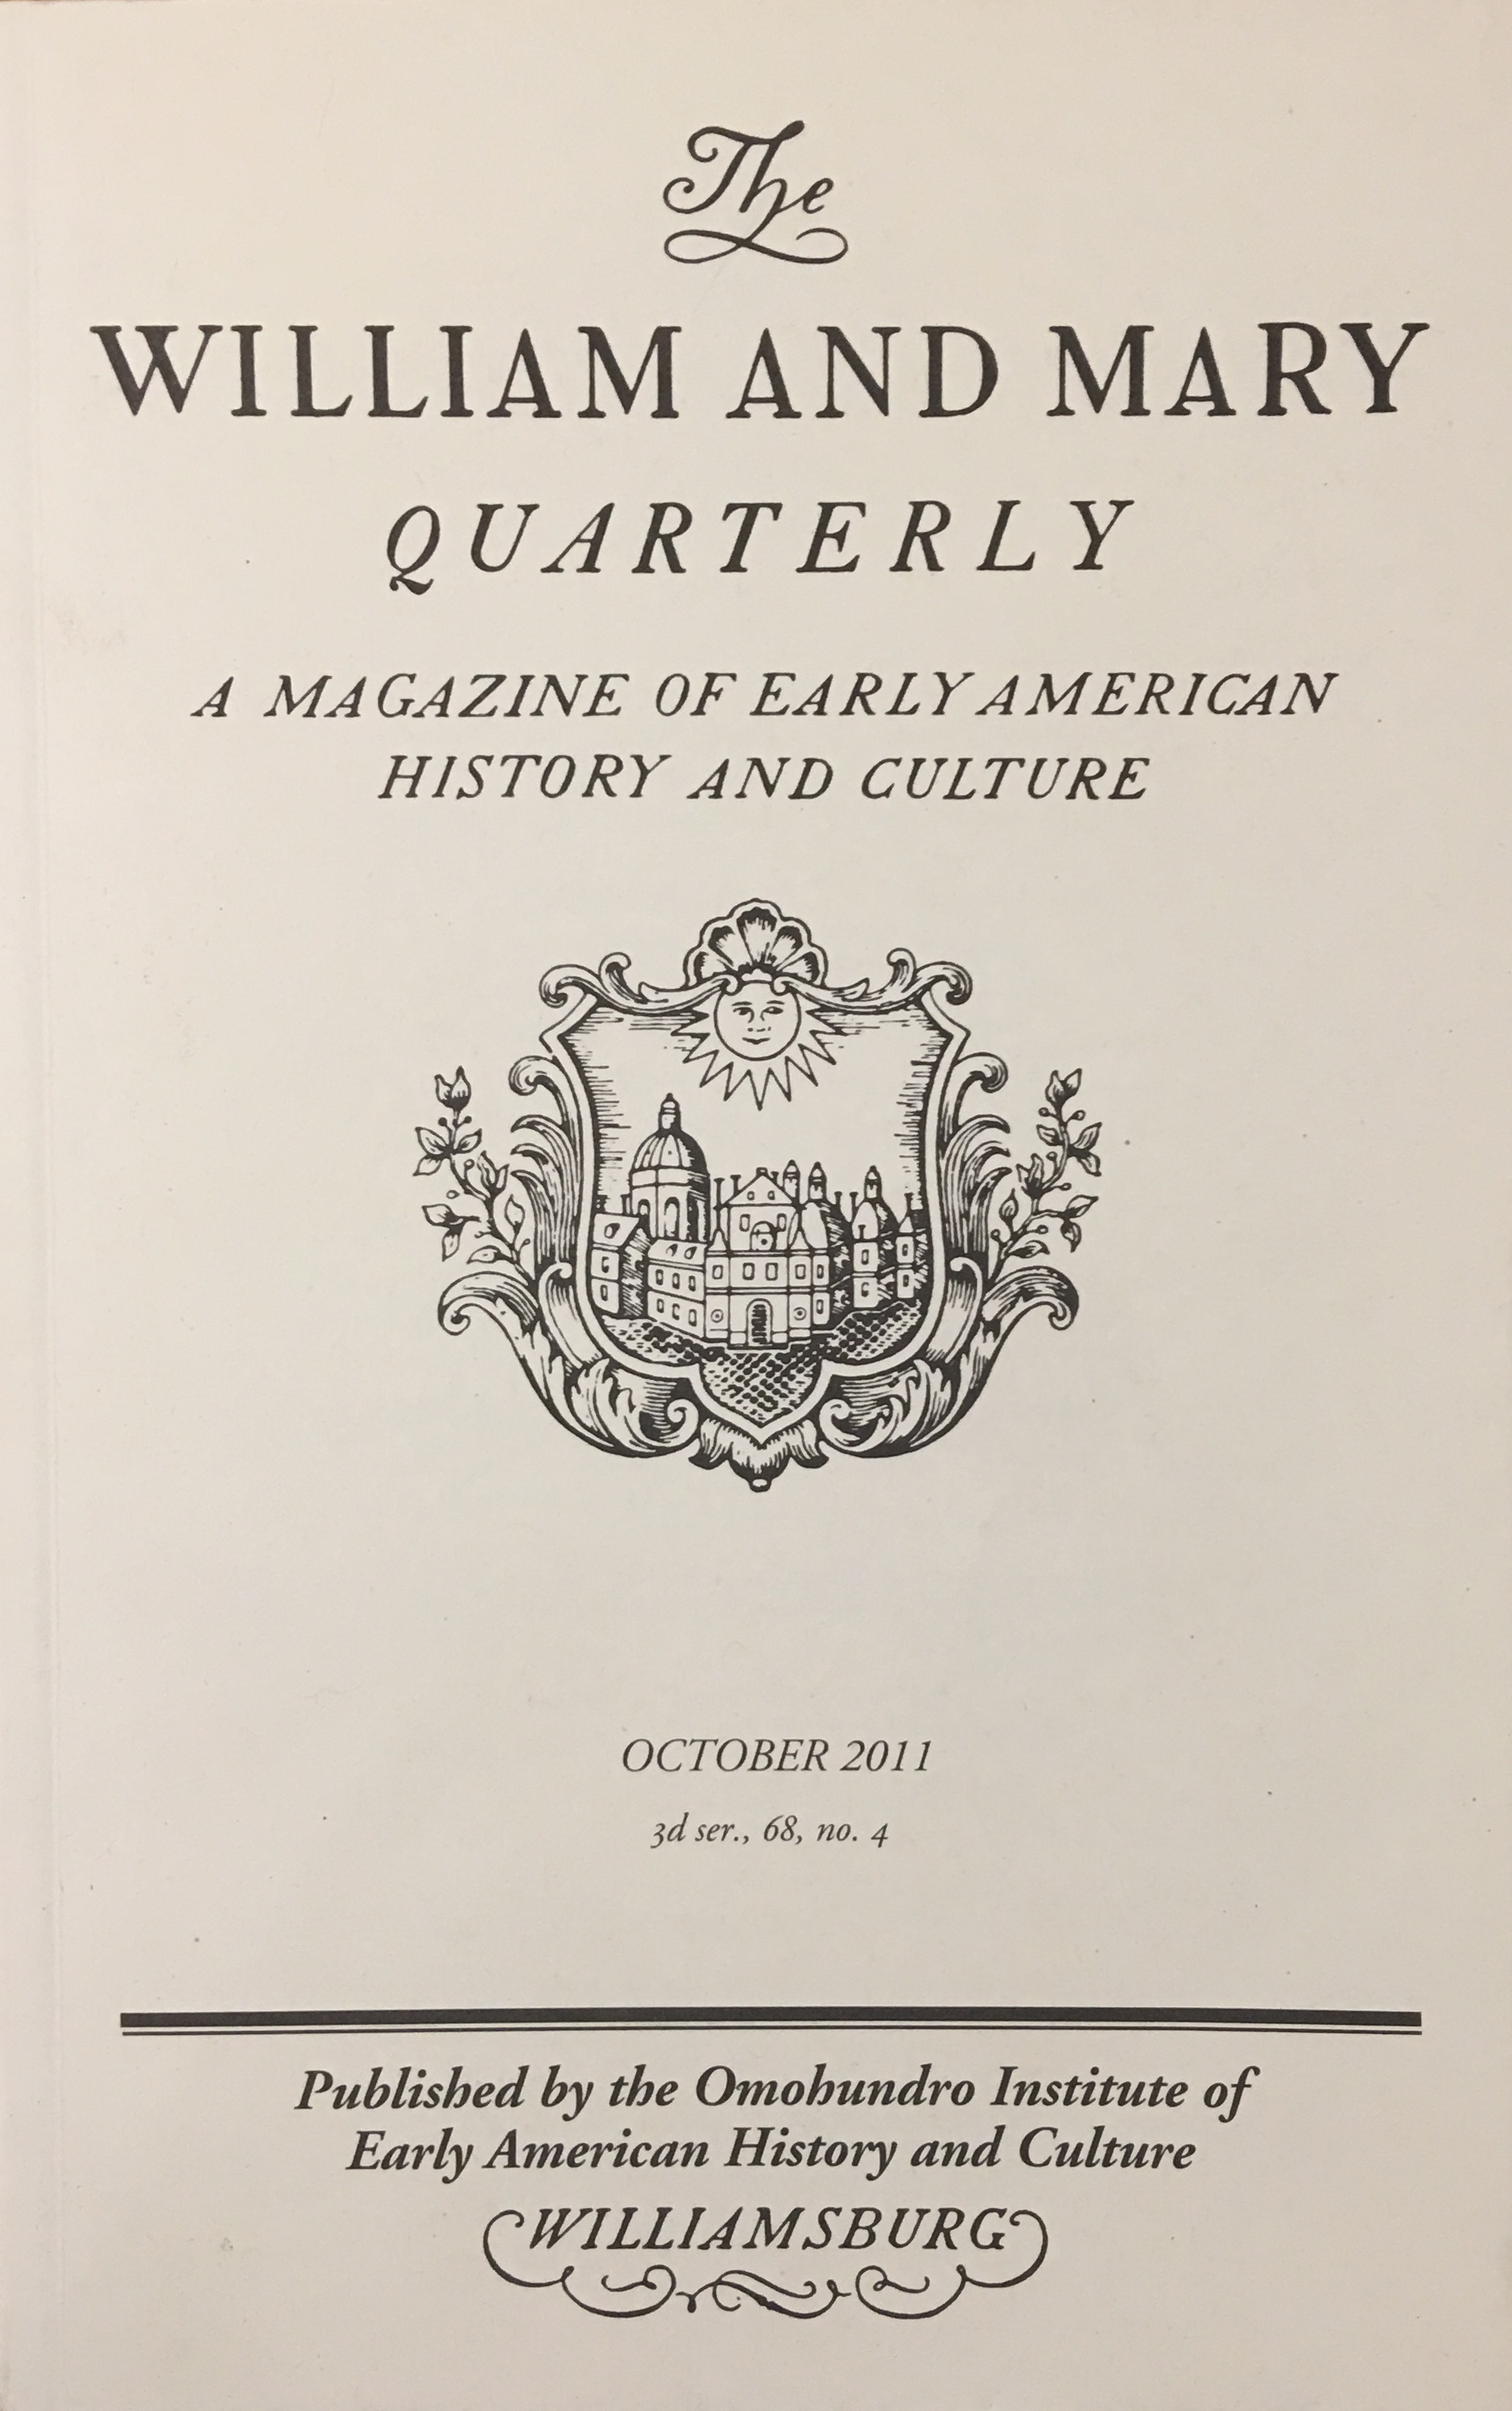 The William and Mary Quarterly — Michael McDonnell, Professor of Early American History pic pic